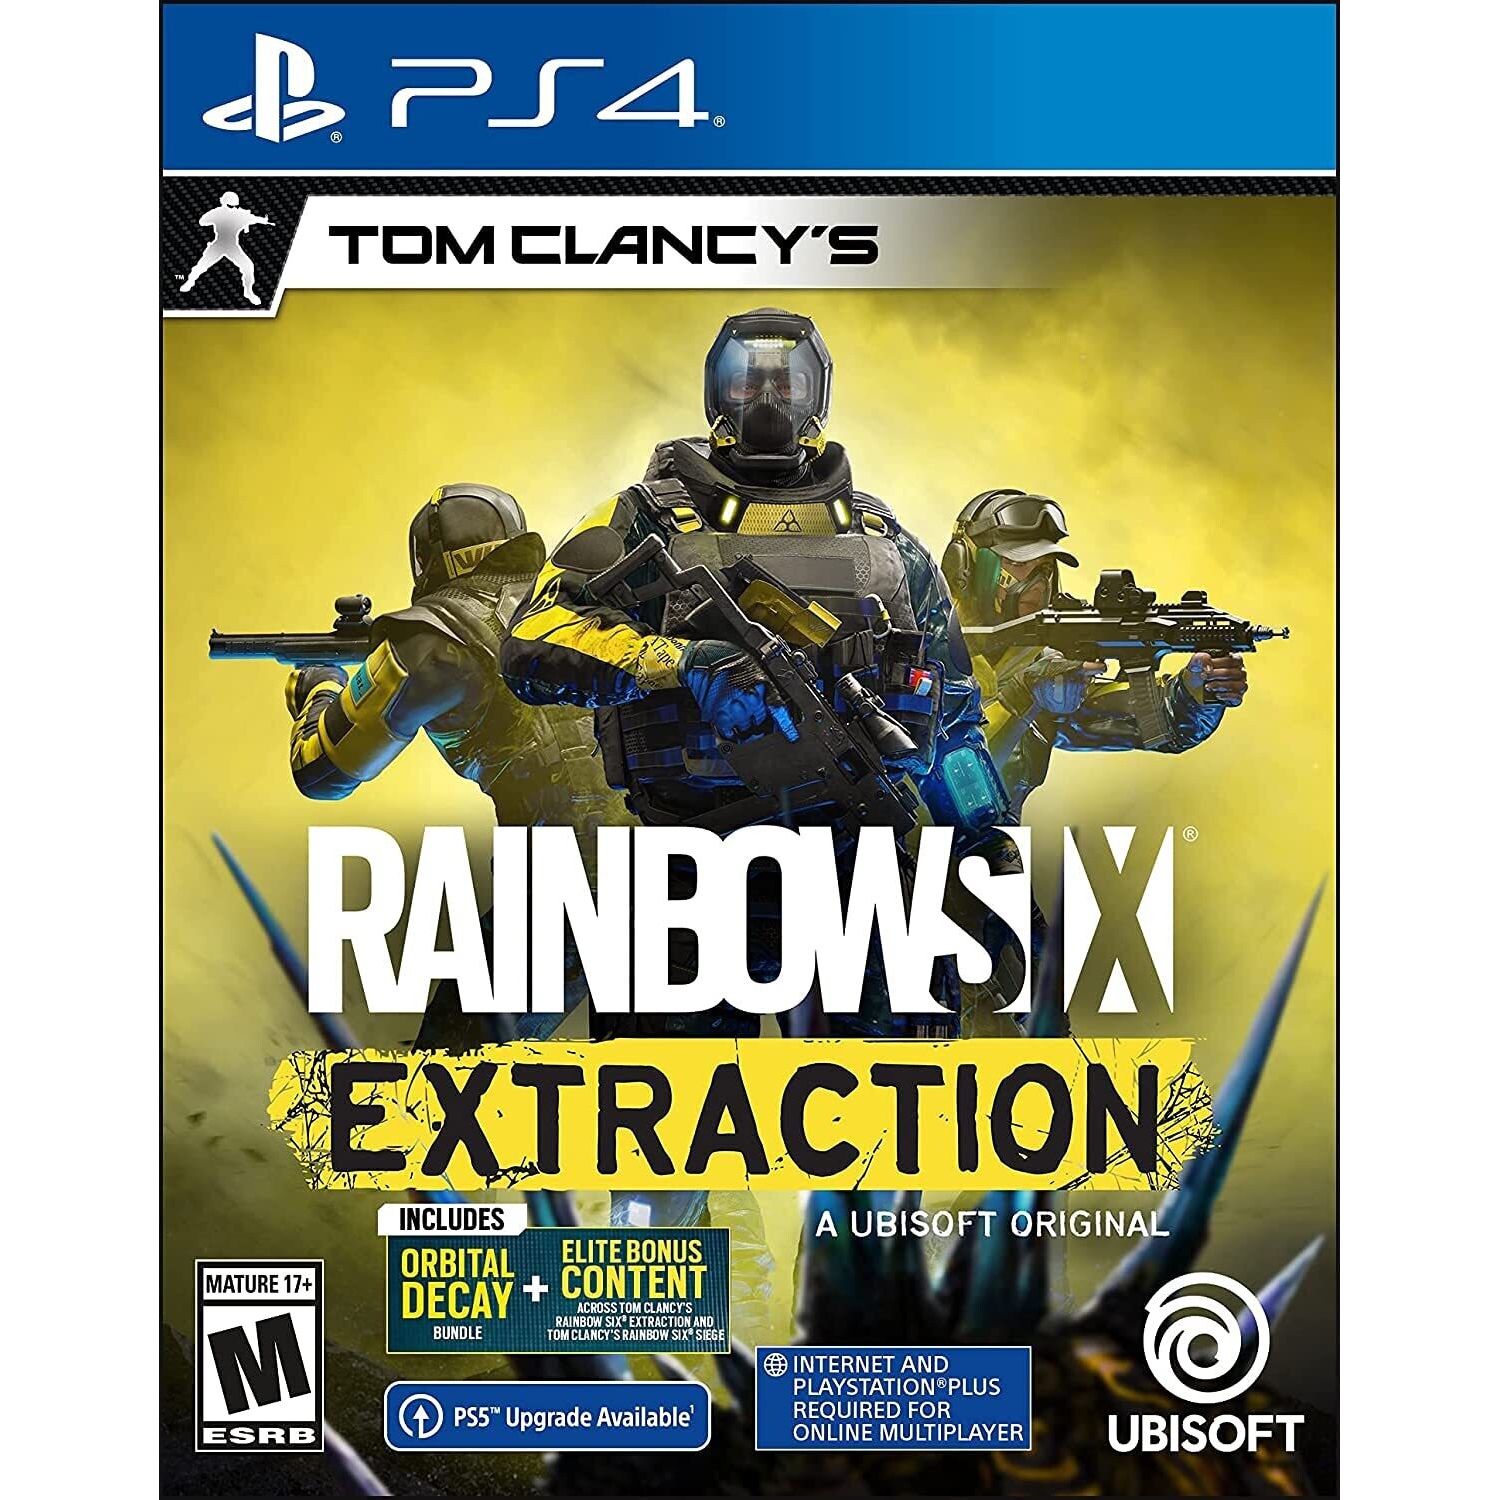 Tom Clancy's Rainbow Six Extraction Standard Edition for PlayStation 4 [VIDEOGAMES]